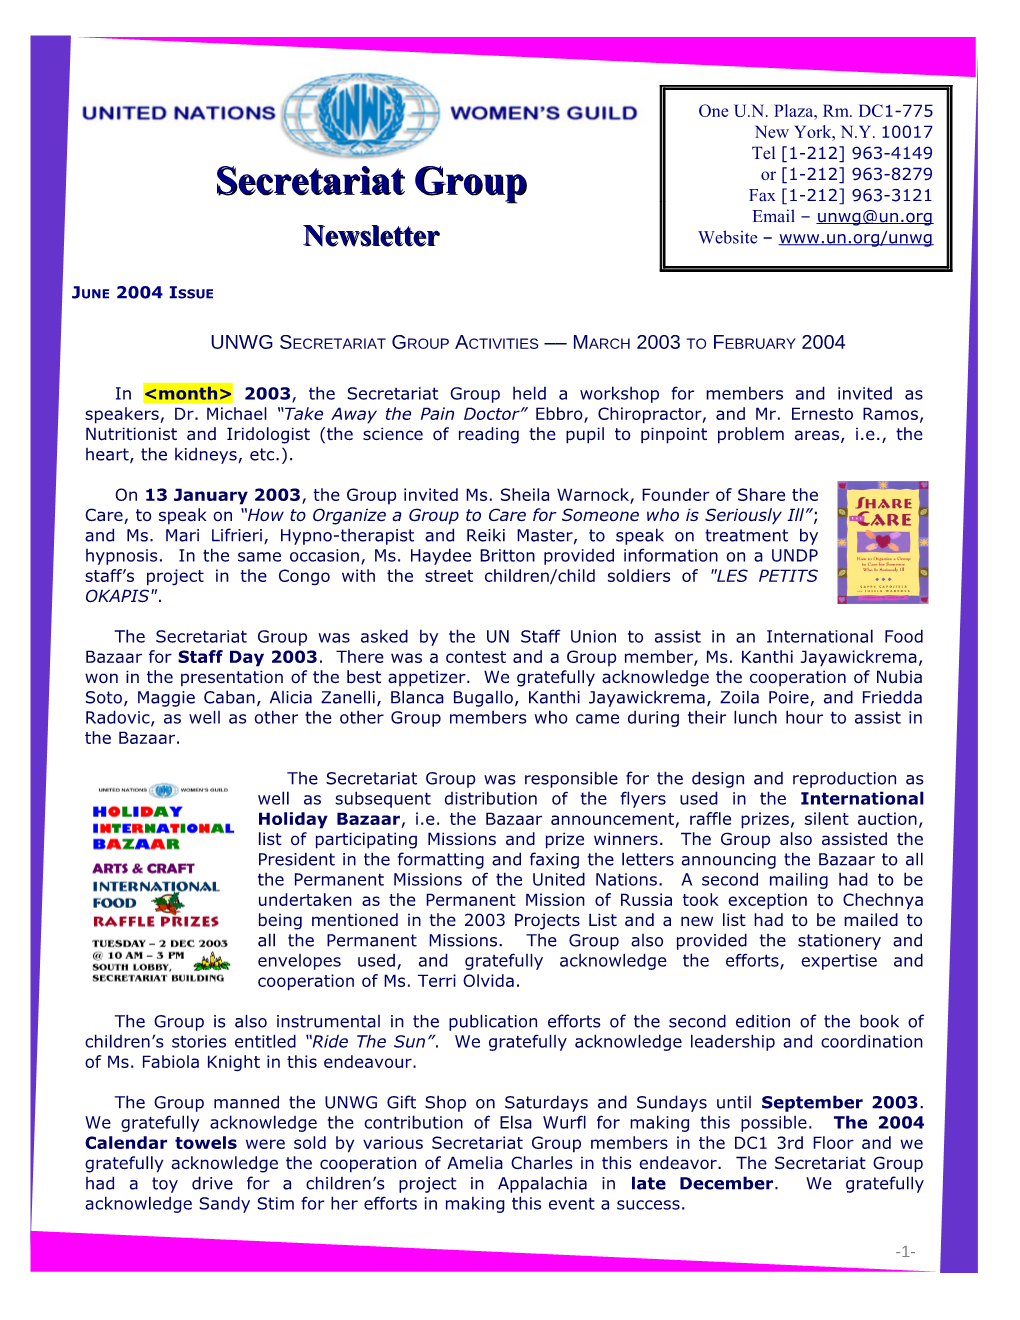 UNWG Secretariat Group Activities March 2003 to February 2004